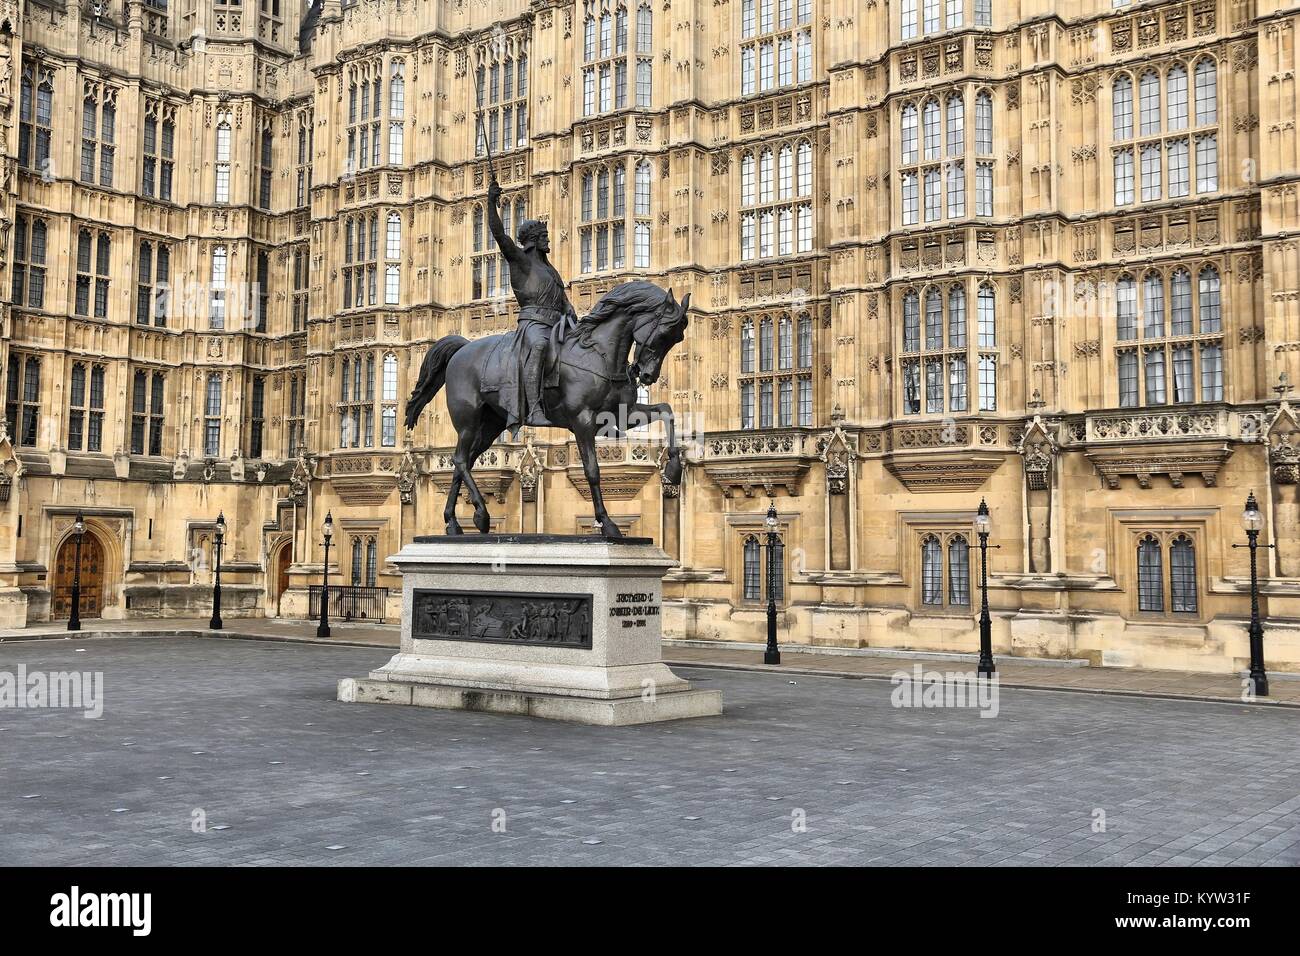 London, England - Palace of Westminster (Houses of Parliament) with Richard Lionheart statue. Stock Photo